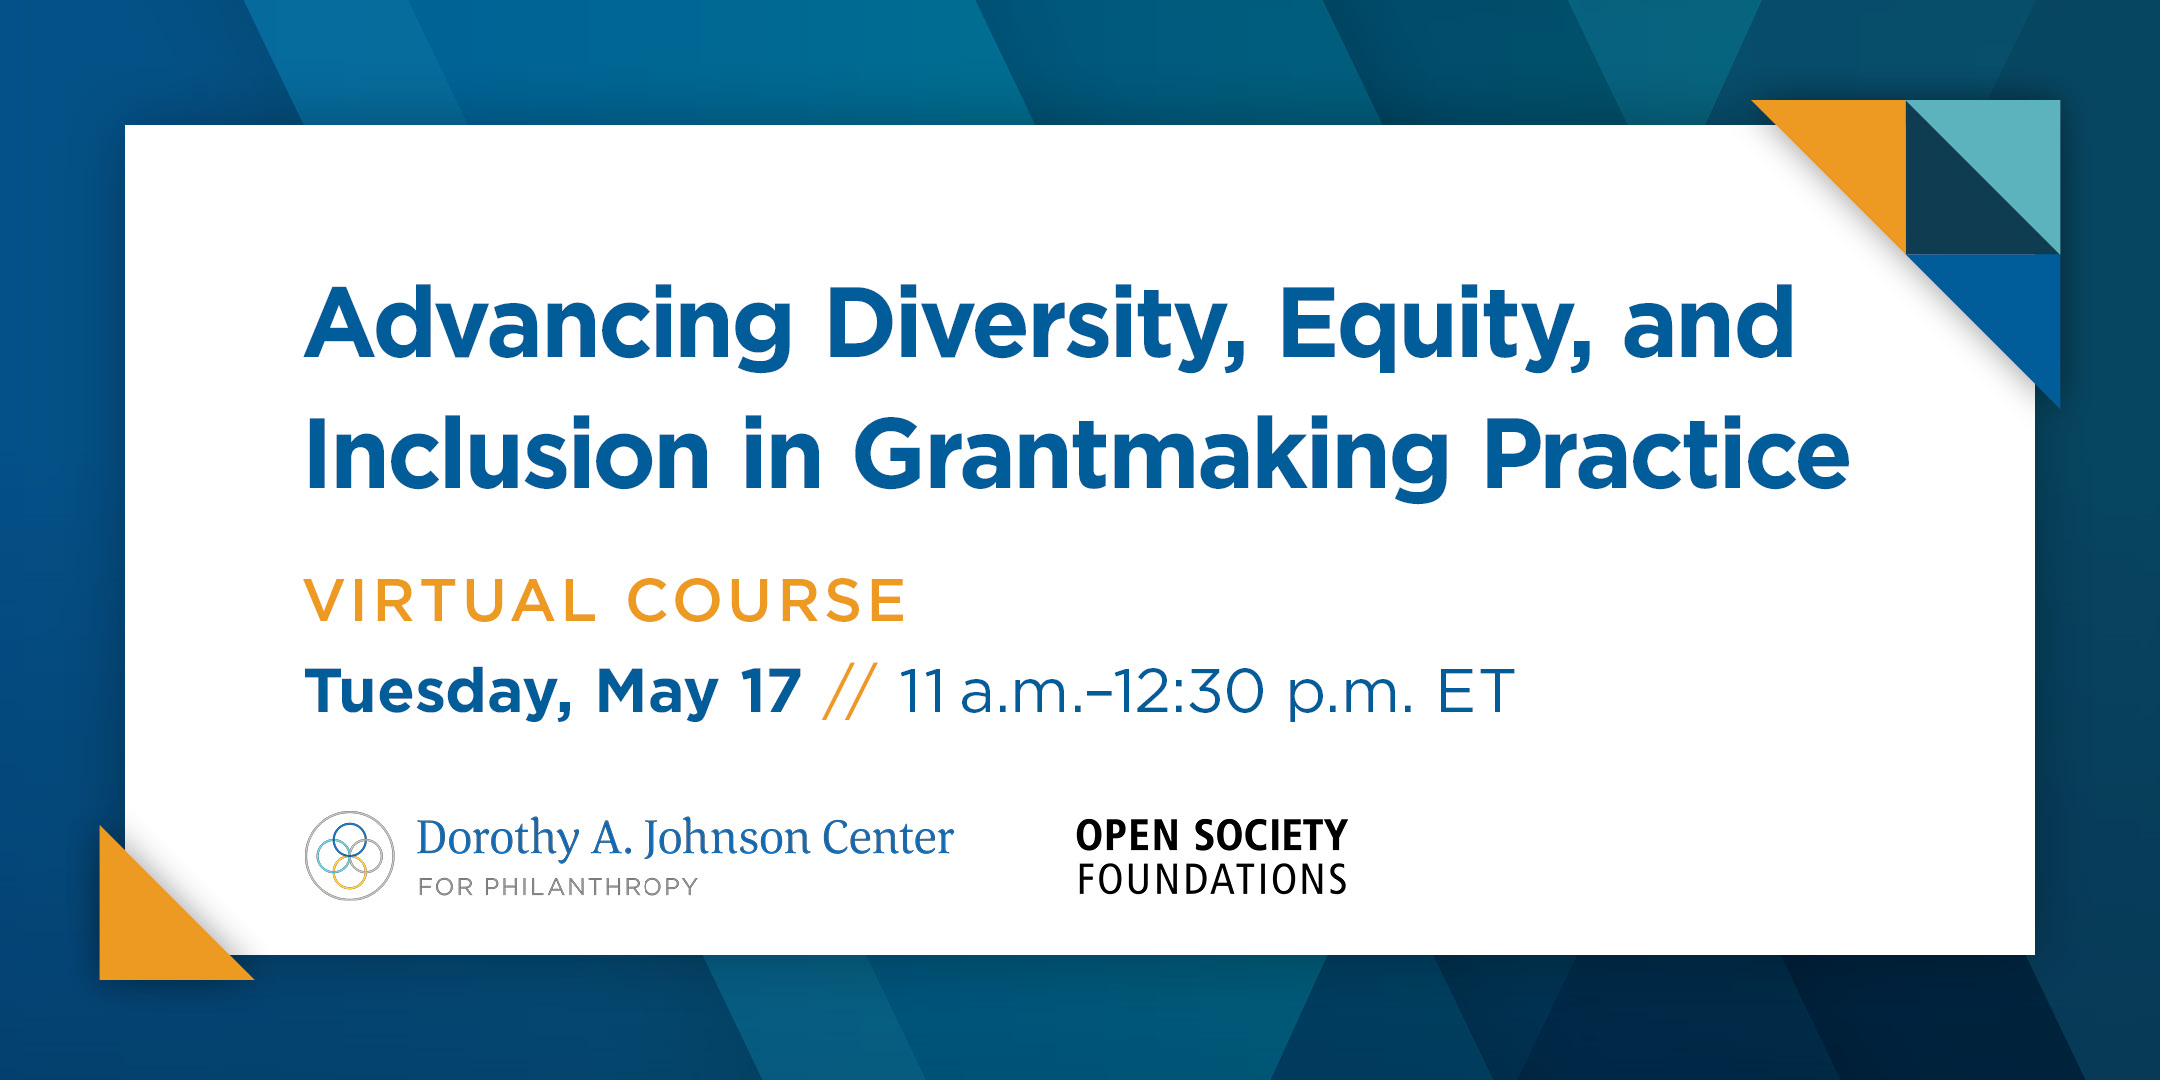 Advancing Diversity, Equity, and Inclusion in Grantmaking Practice